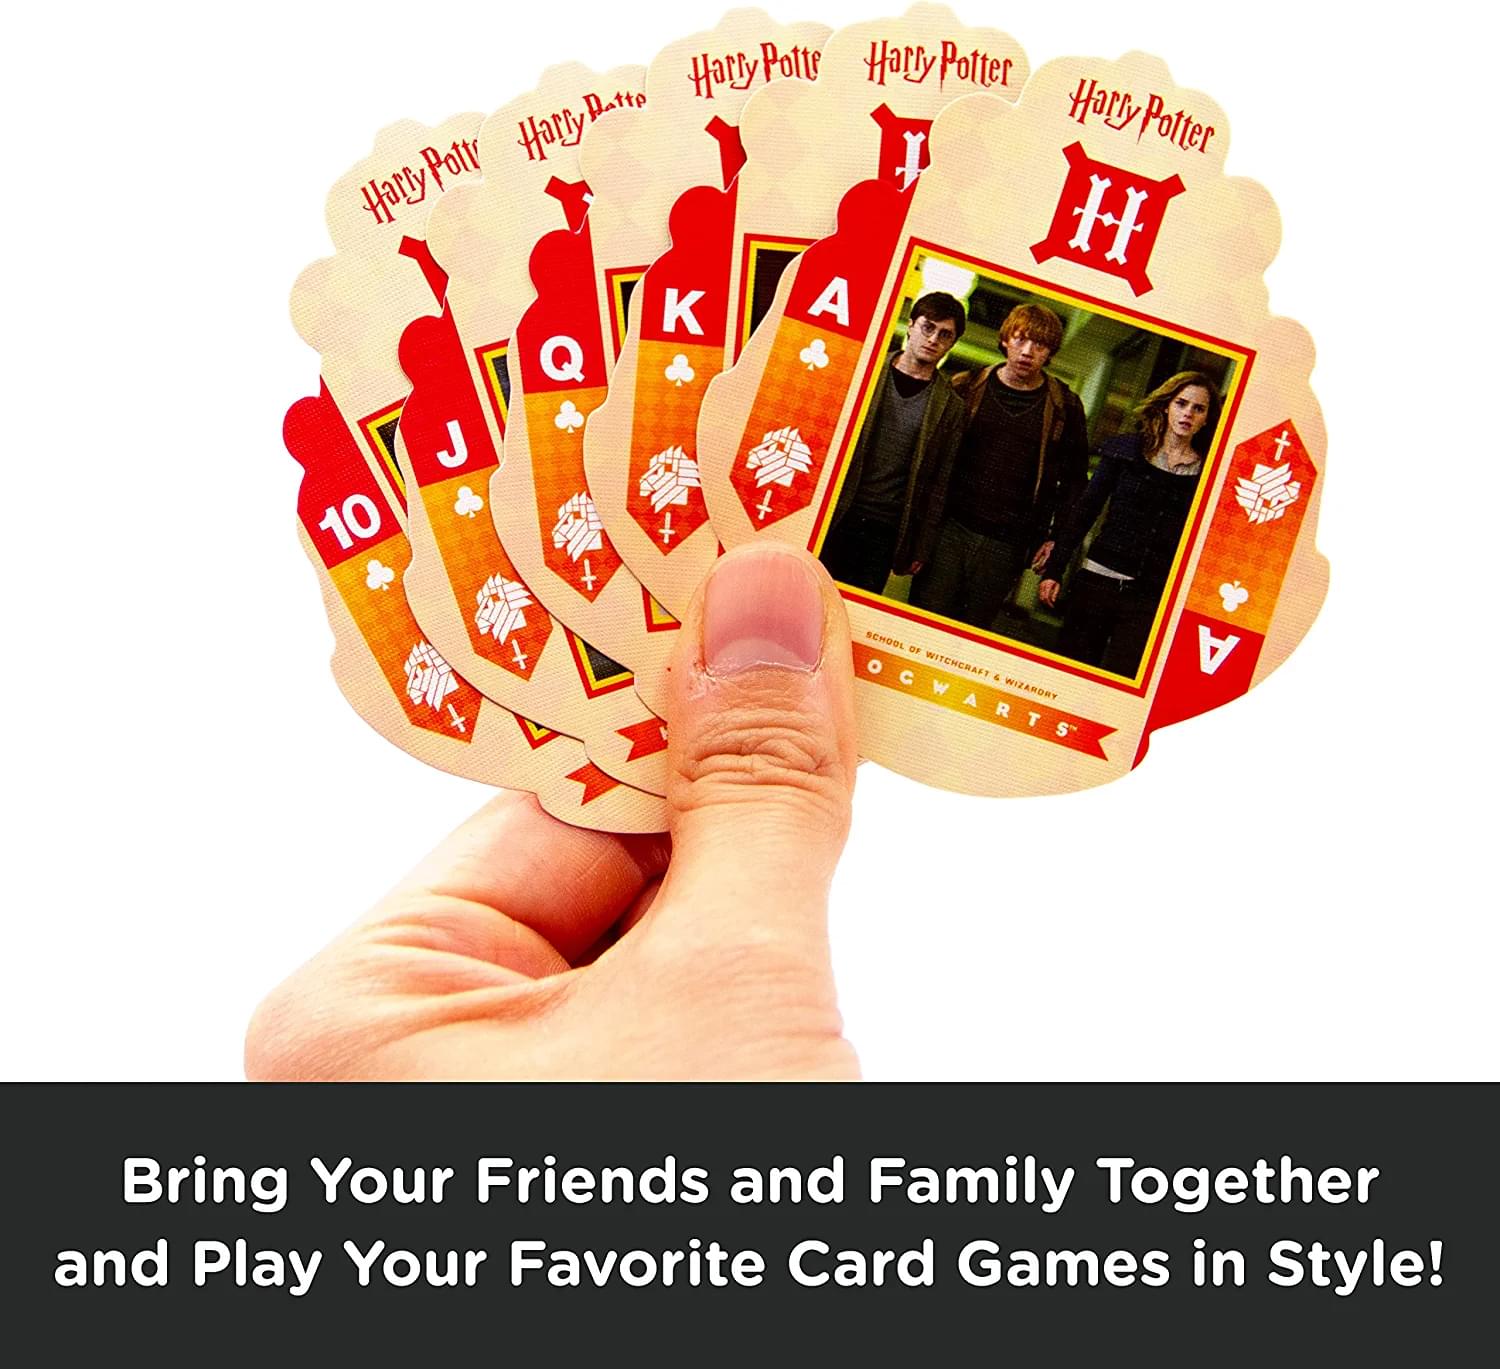 Harry Potter Shaped Playing Cards